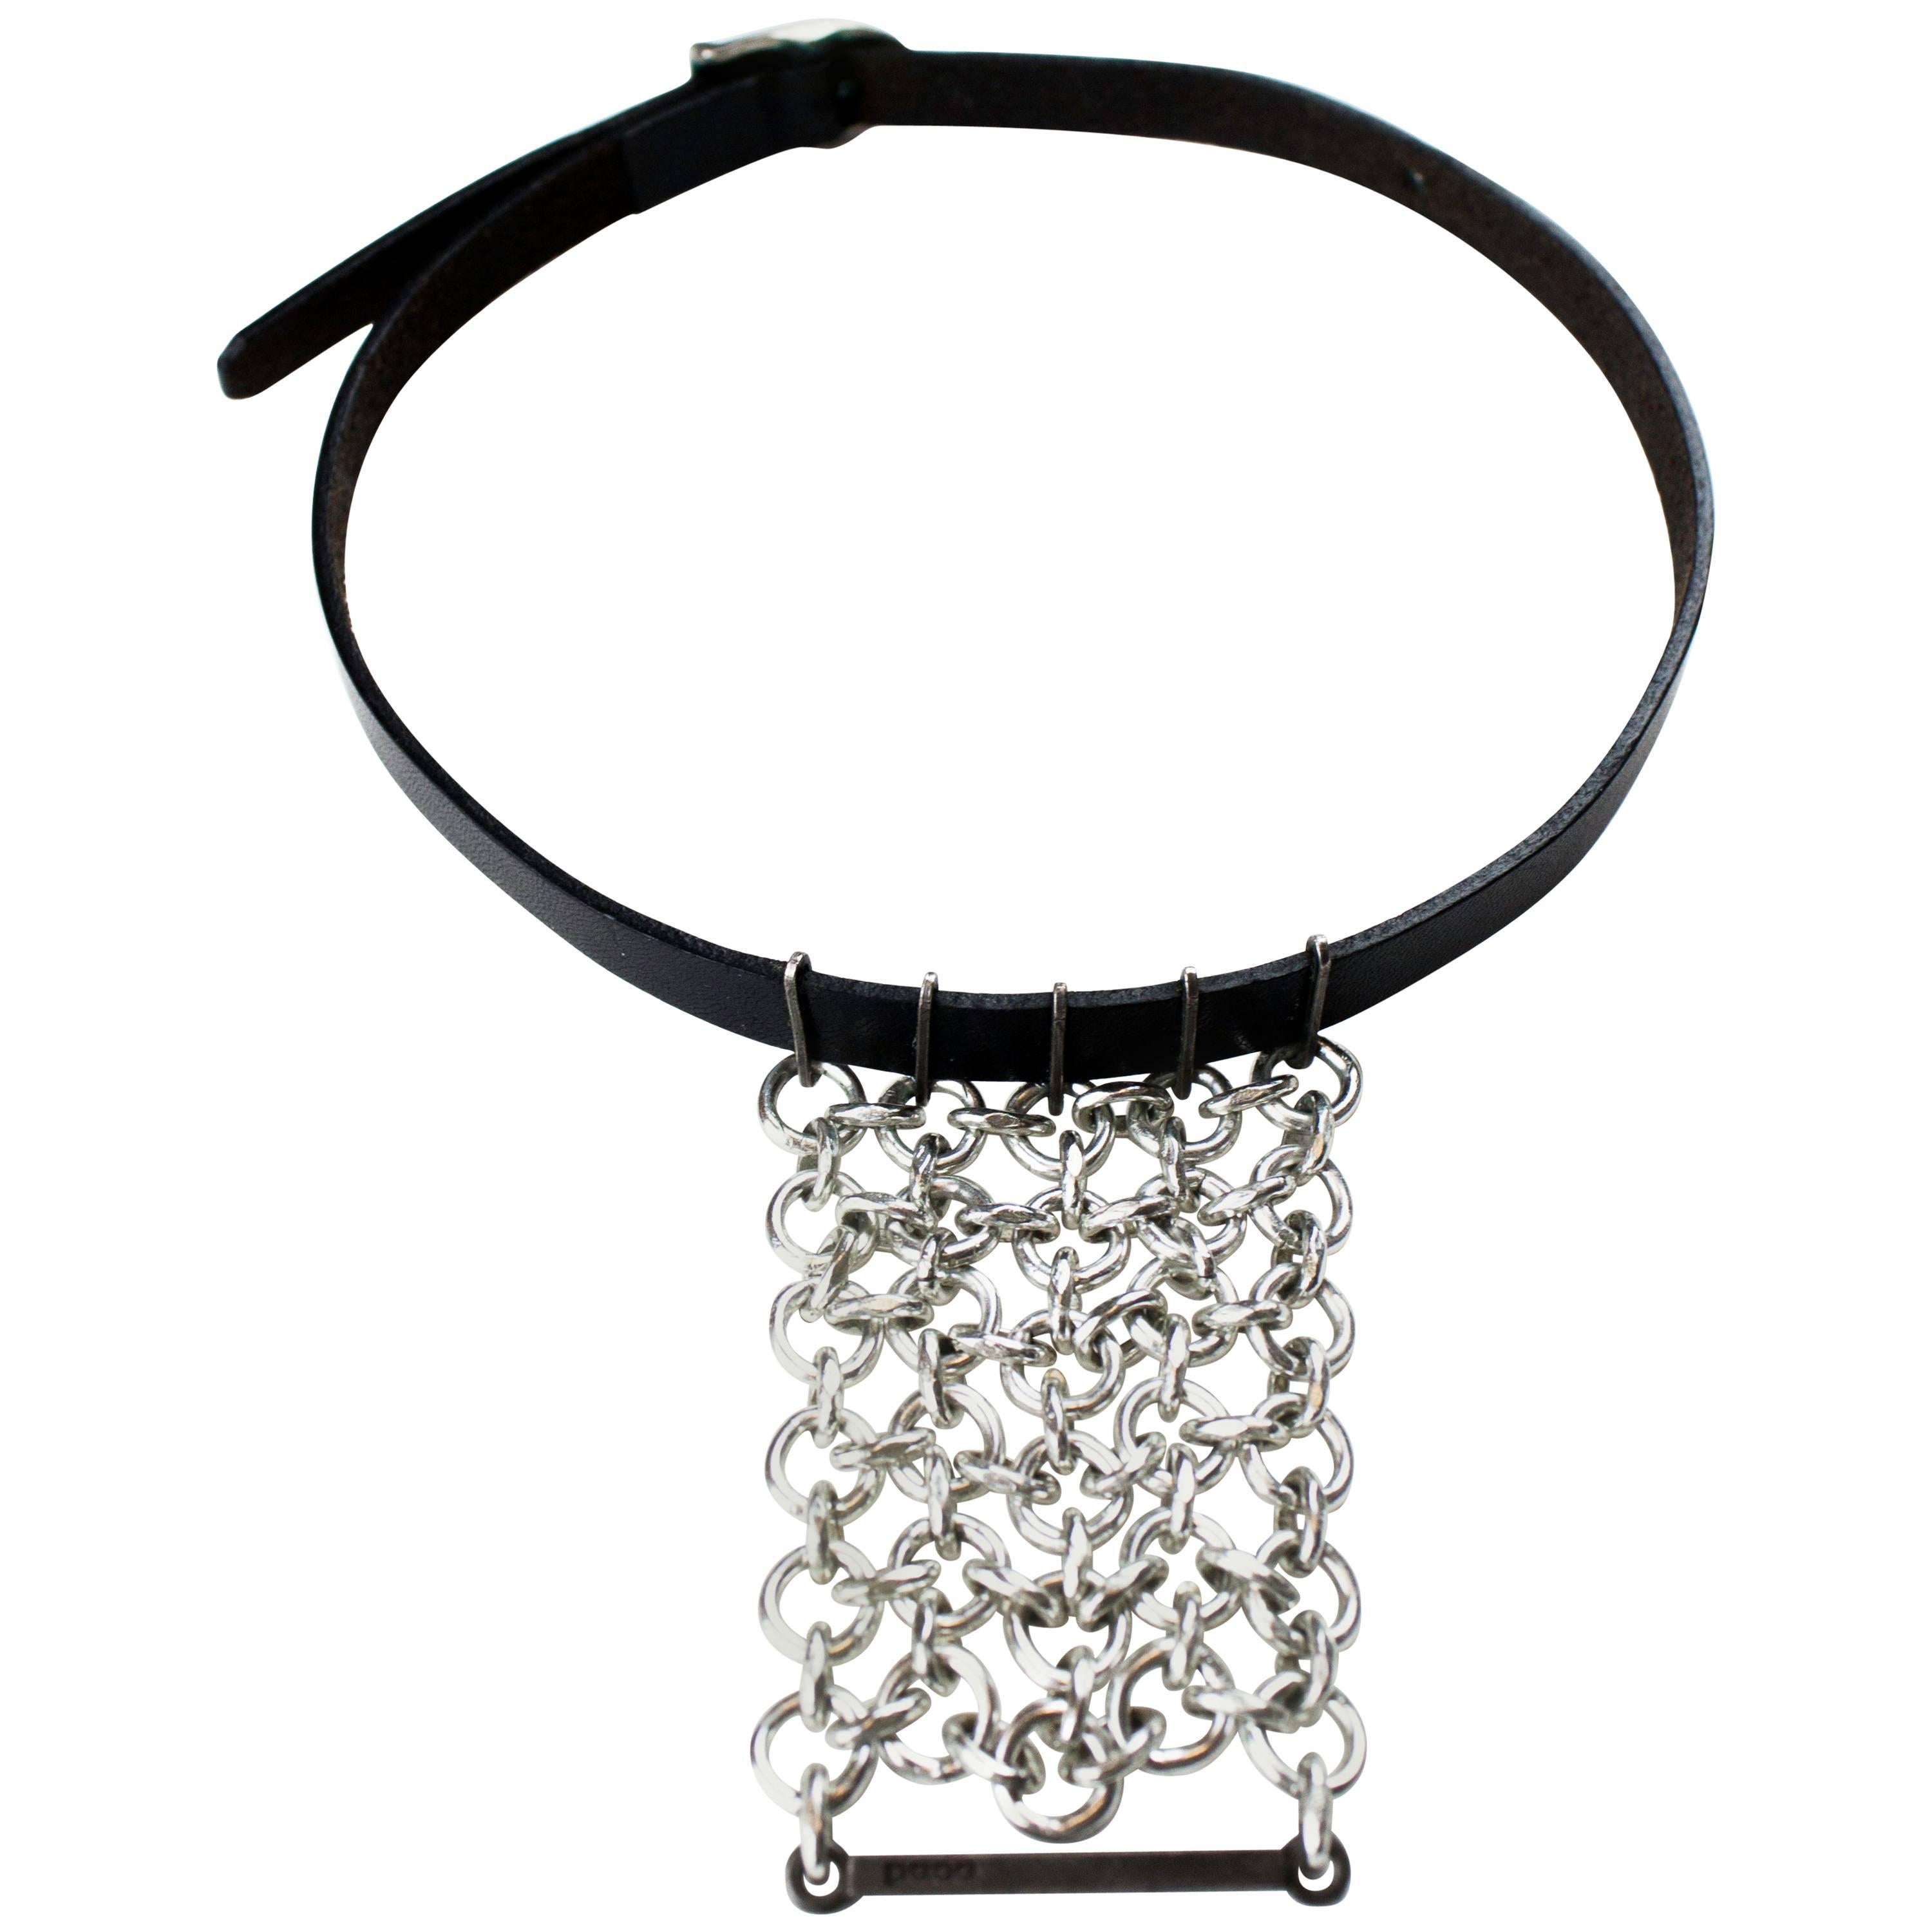 Paco Rabanne black leather and  chainmail necklace, circa 1996